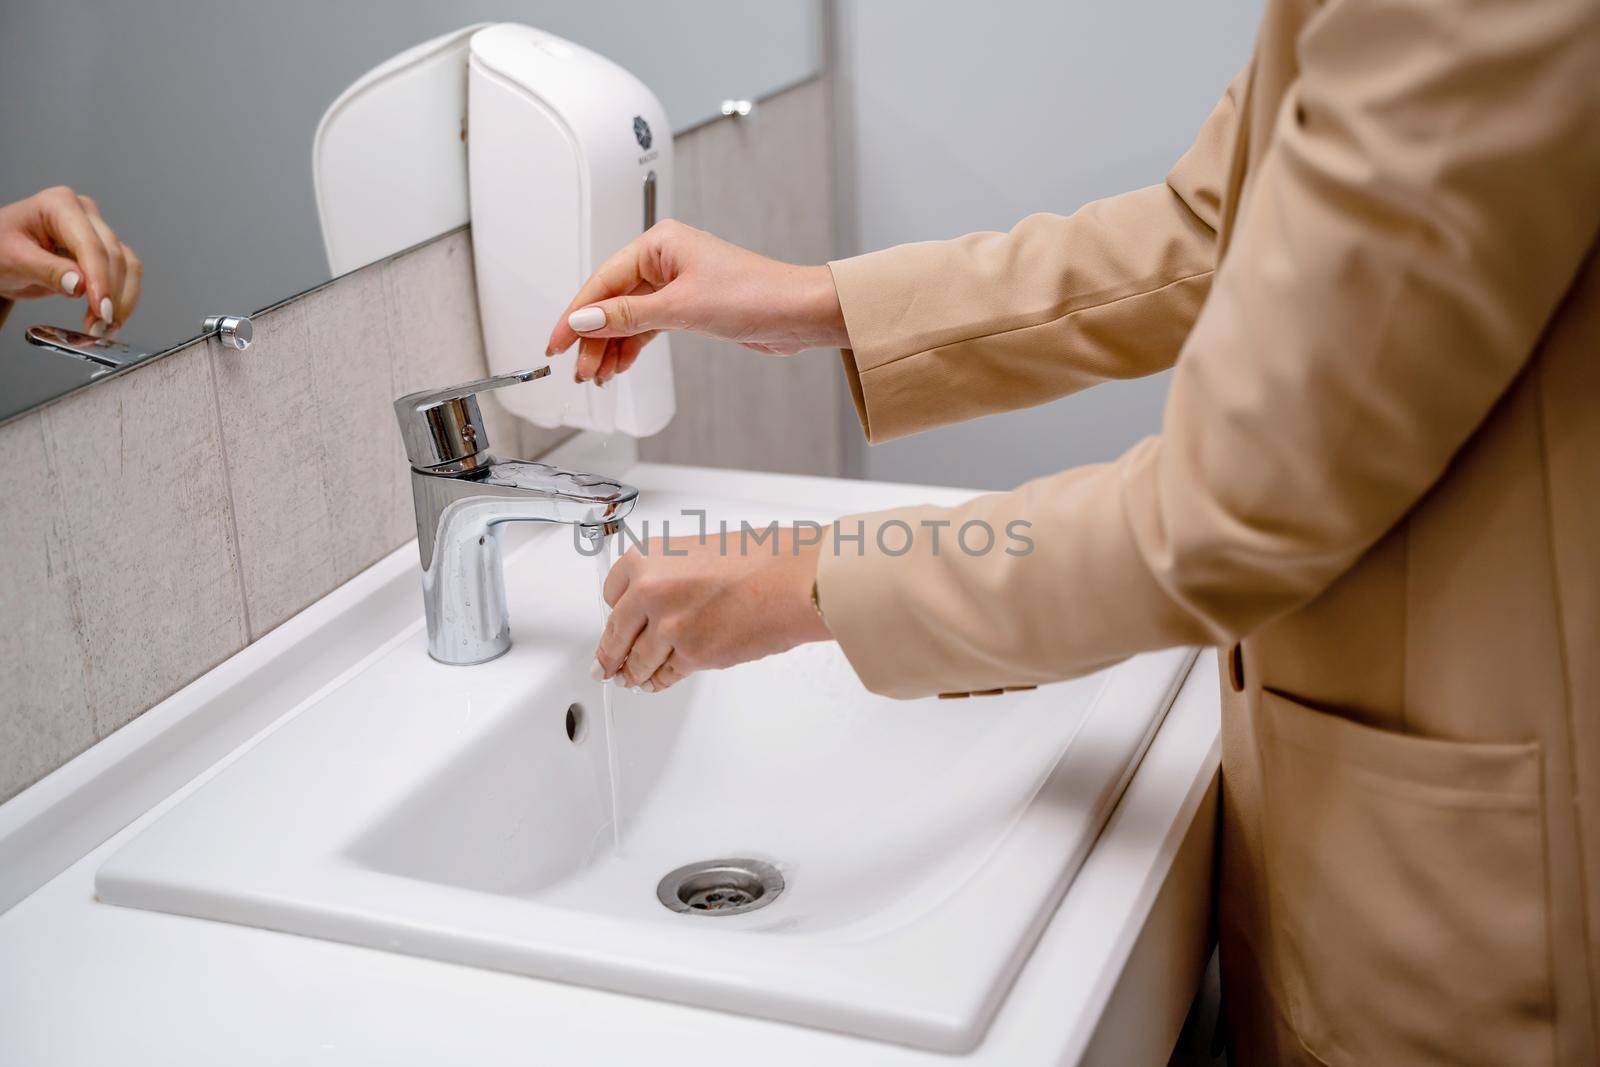 A woman washes her hands under running tap water in a public toilet